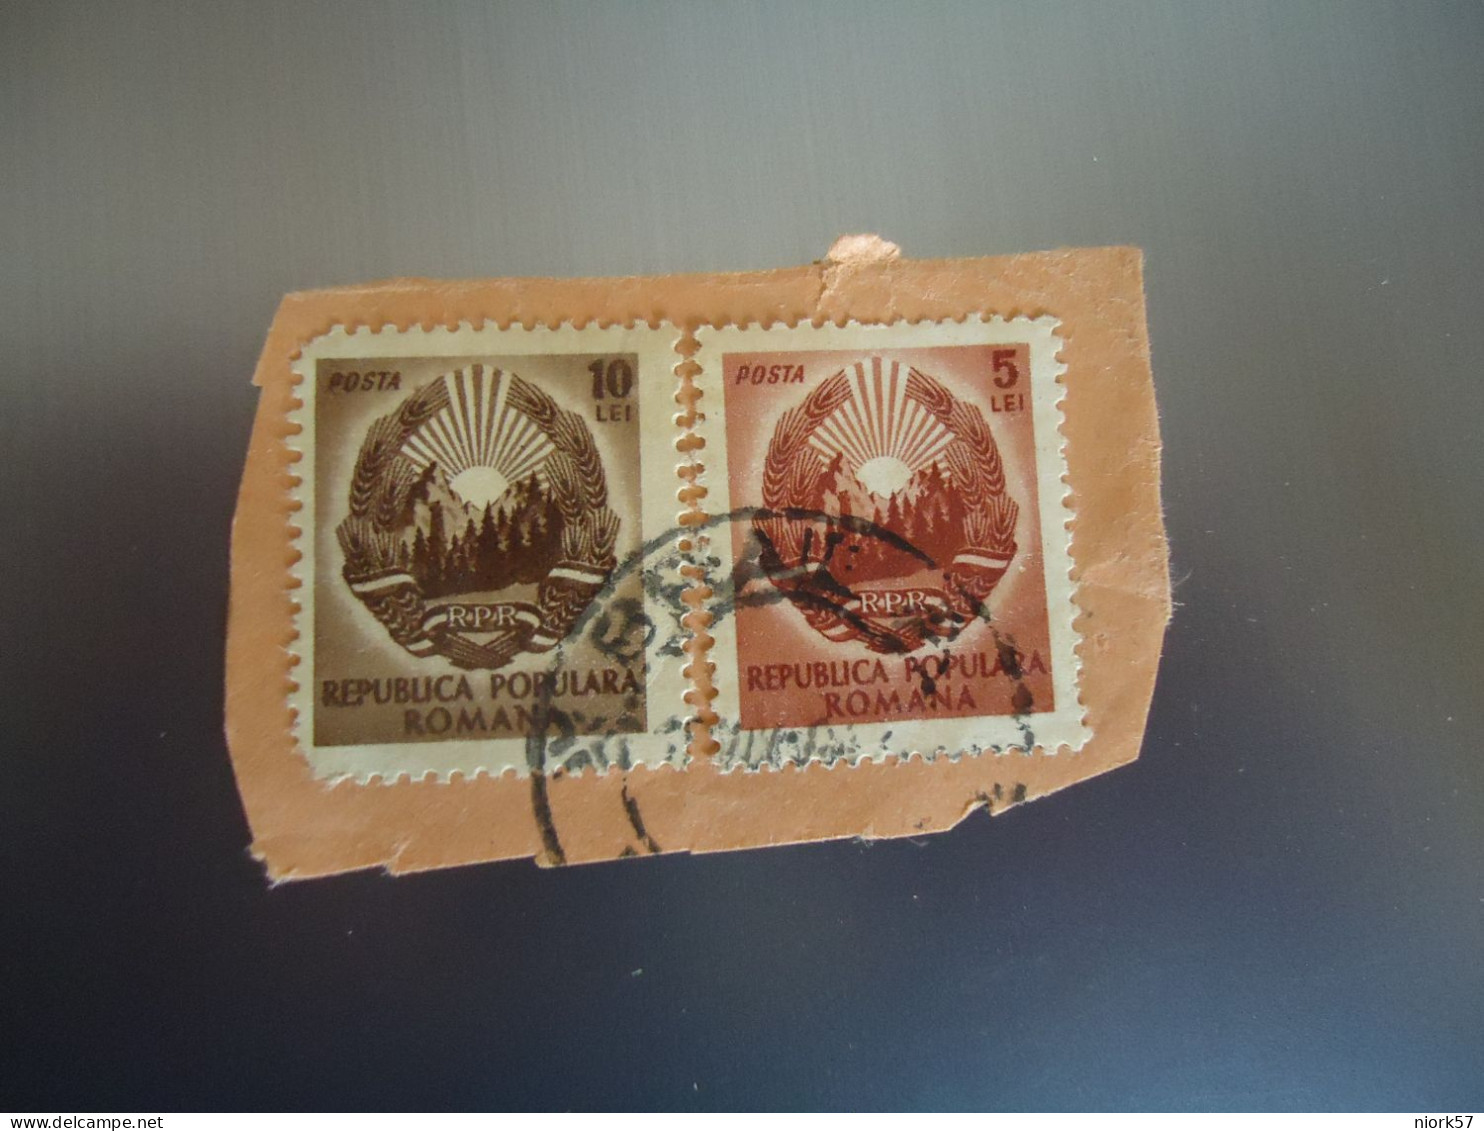 ROMANIA  USED STAMPS 2  ON PAPER  STAMPS 2 OLD  WITH POSTMARK - Poststempel (Marcophilie)